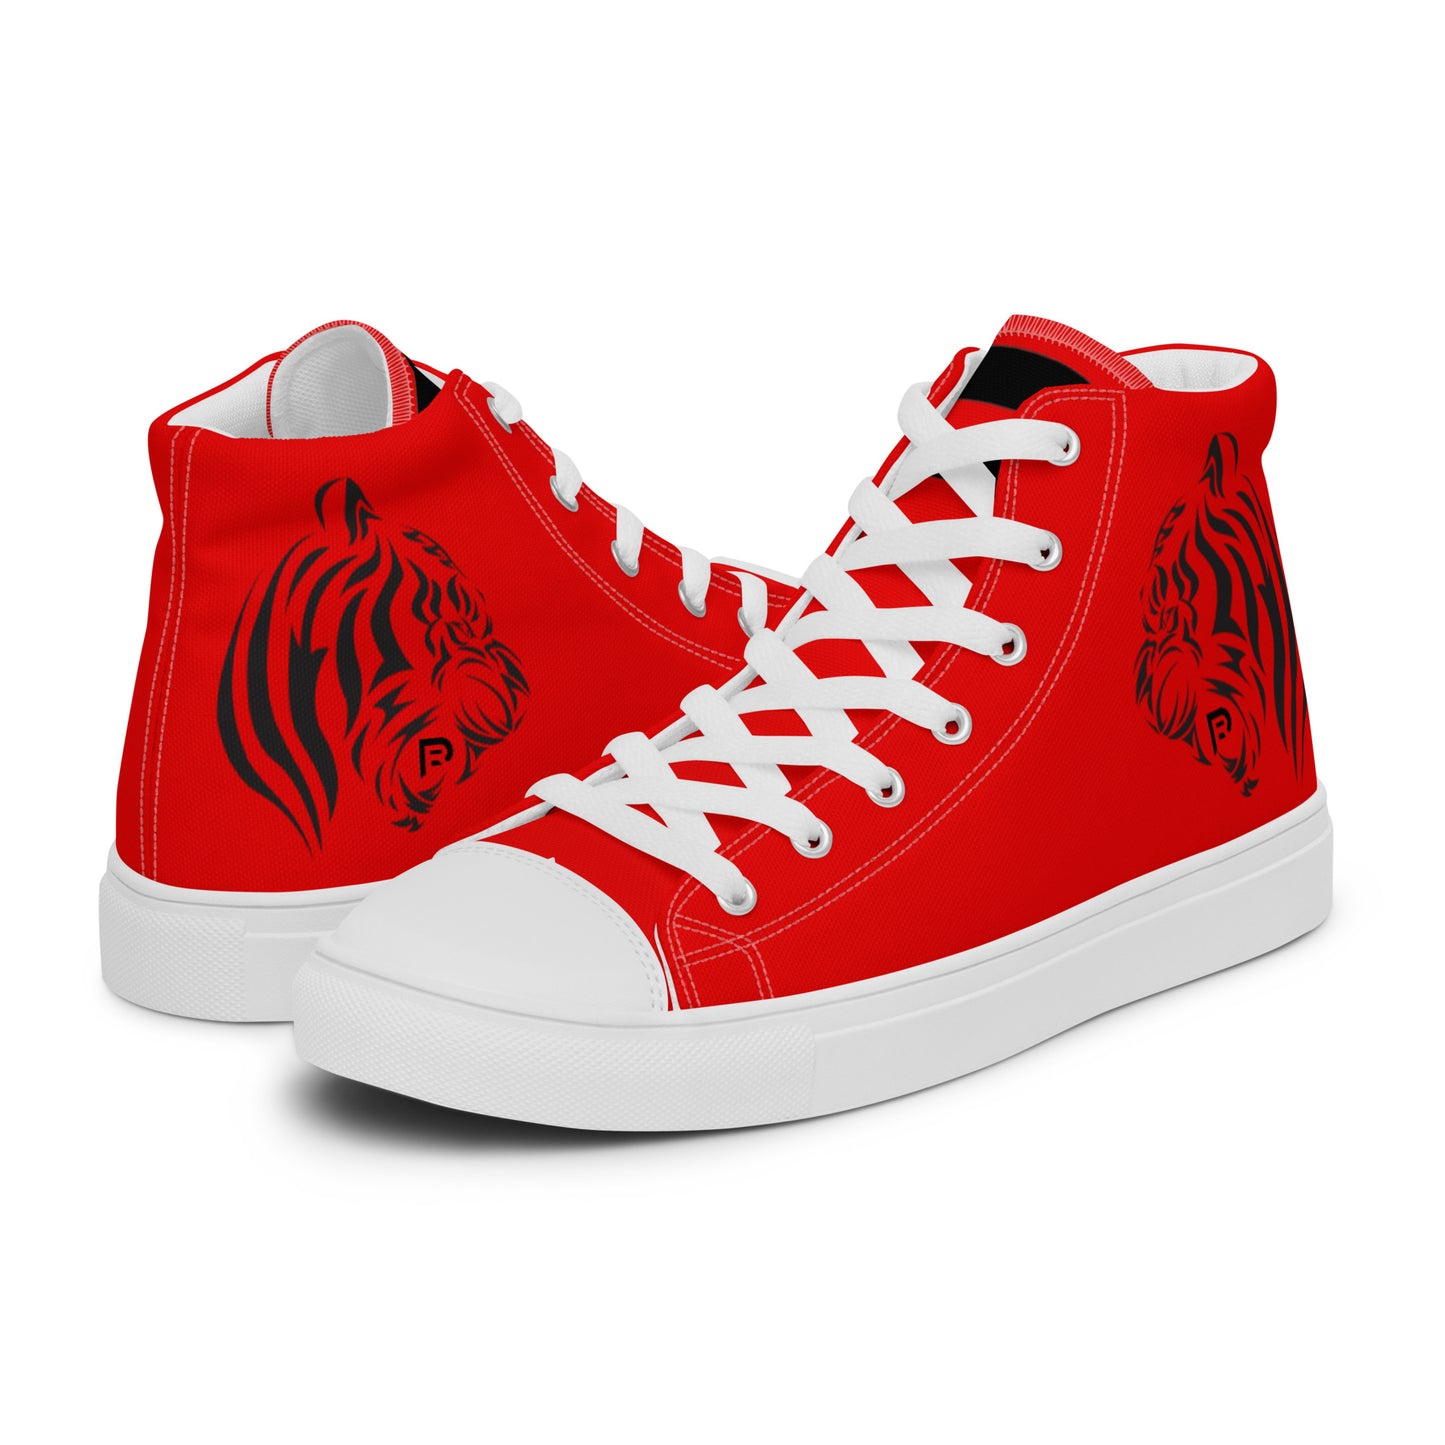 Red Weapon Tiger Bomb High Top Canvas Shoes